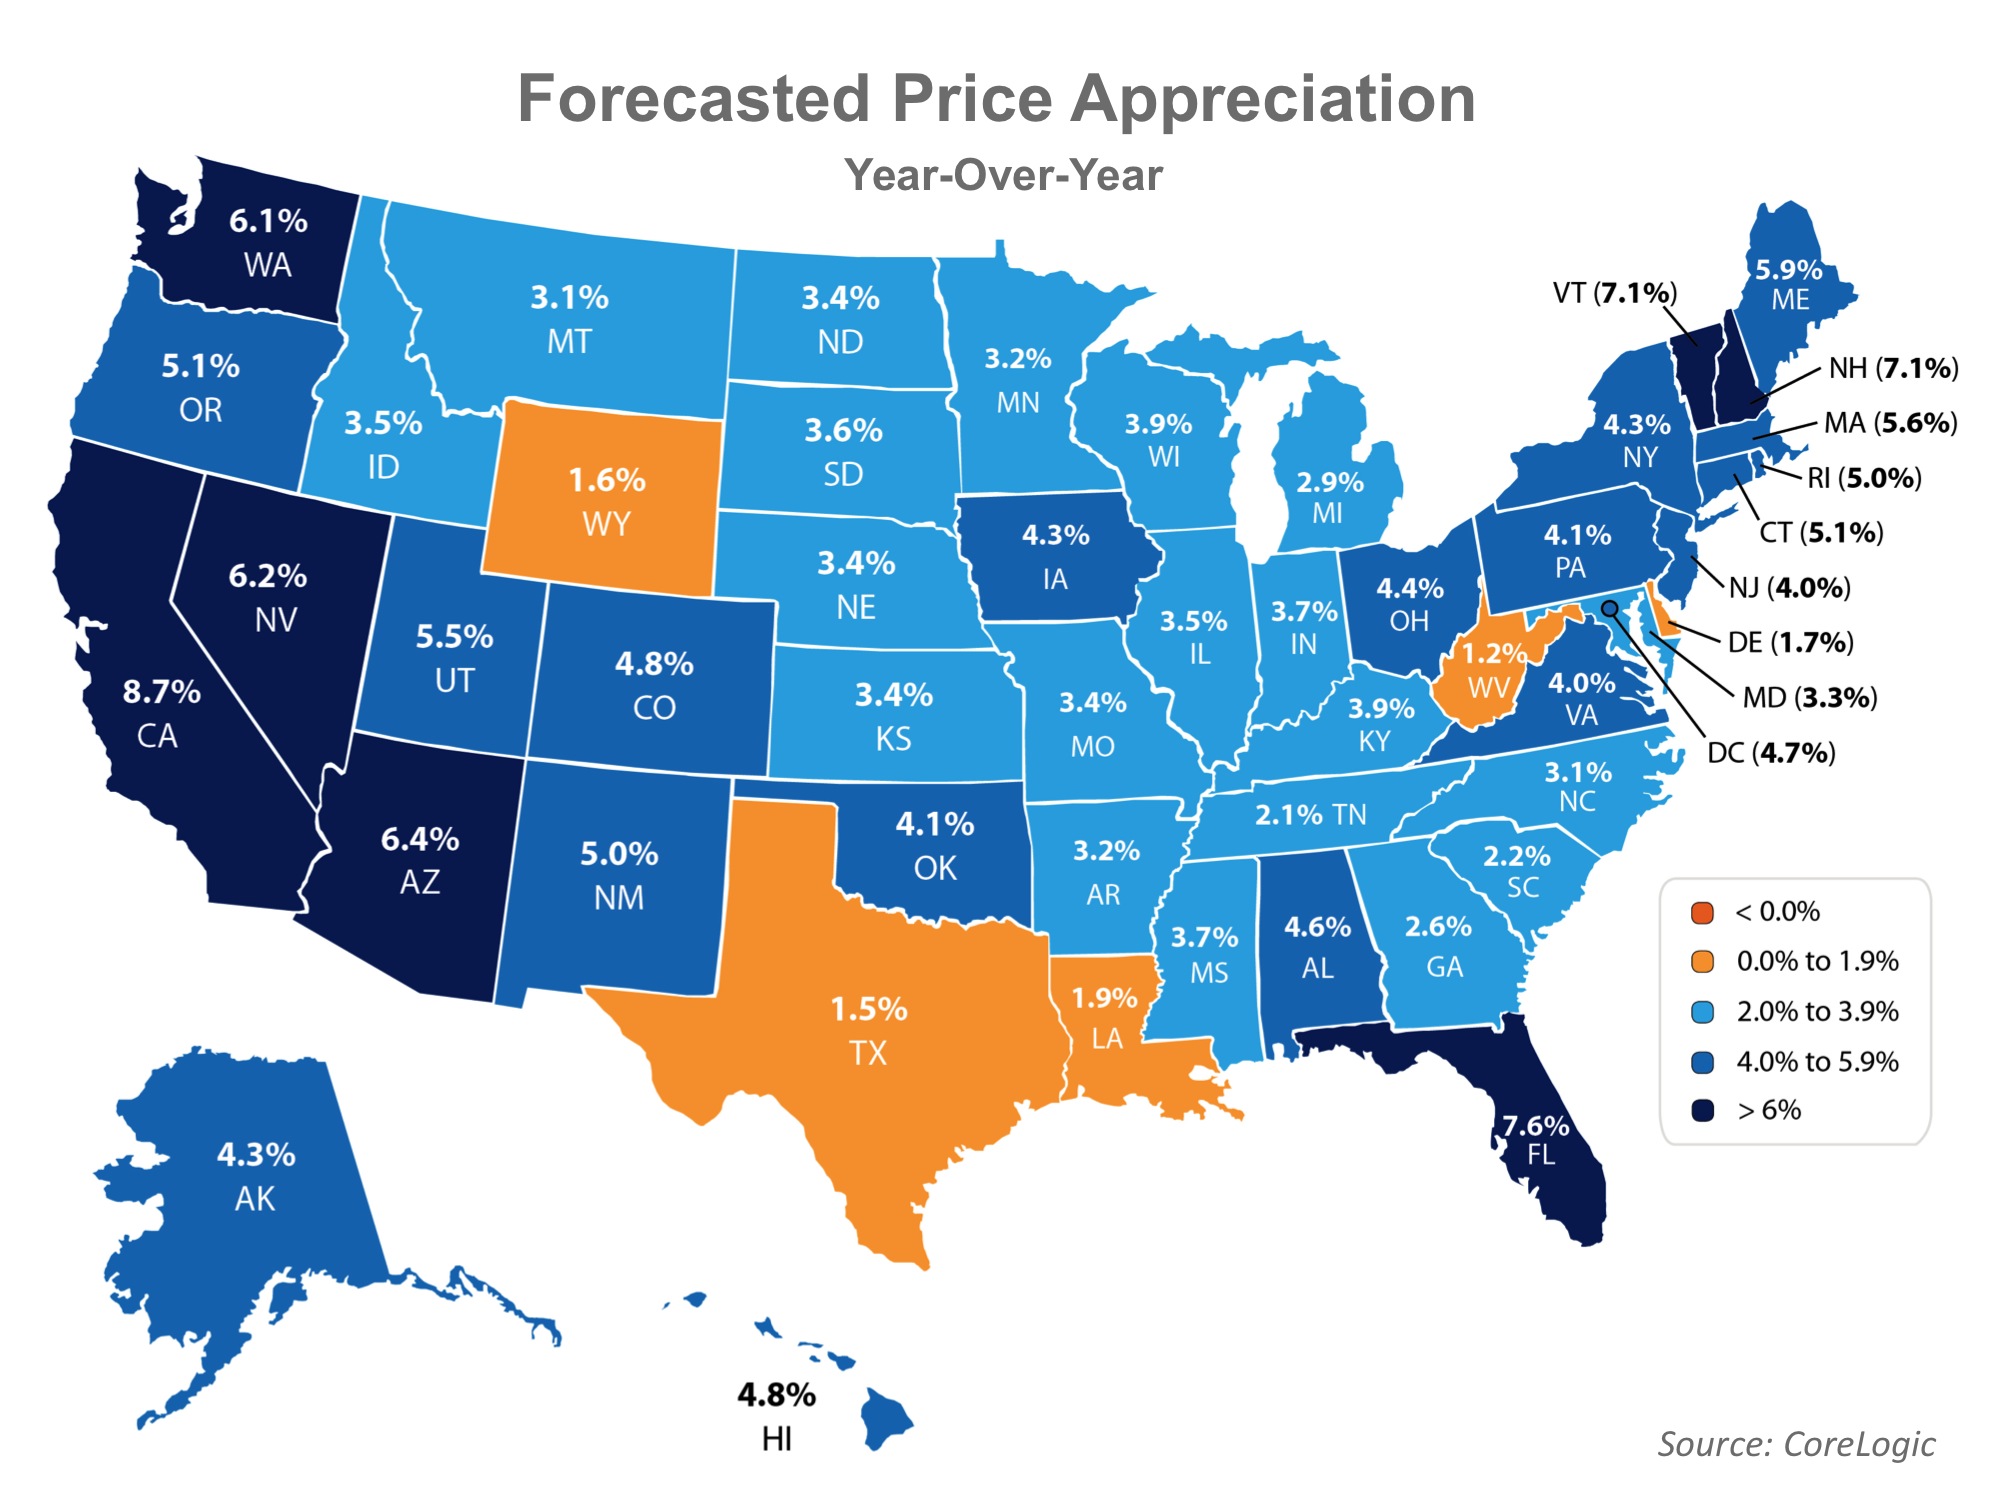 Forecasted Price Appreciation Year-Over-Year | Keeping Current Matters